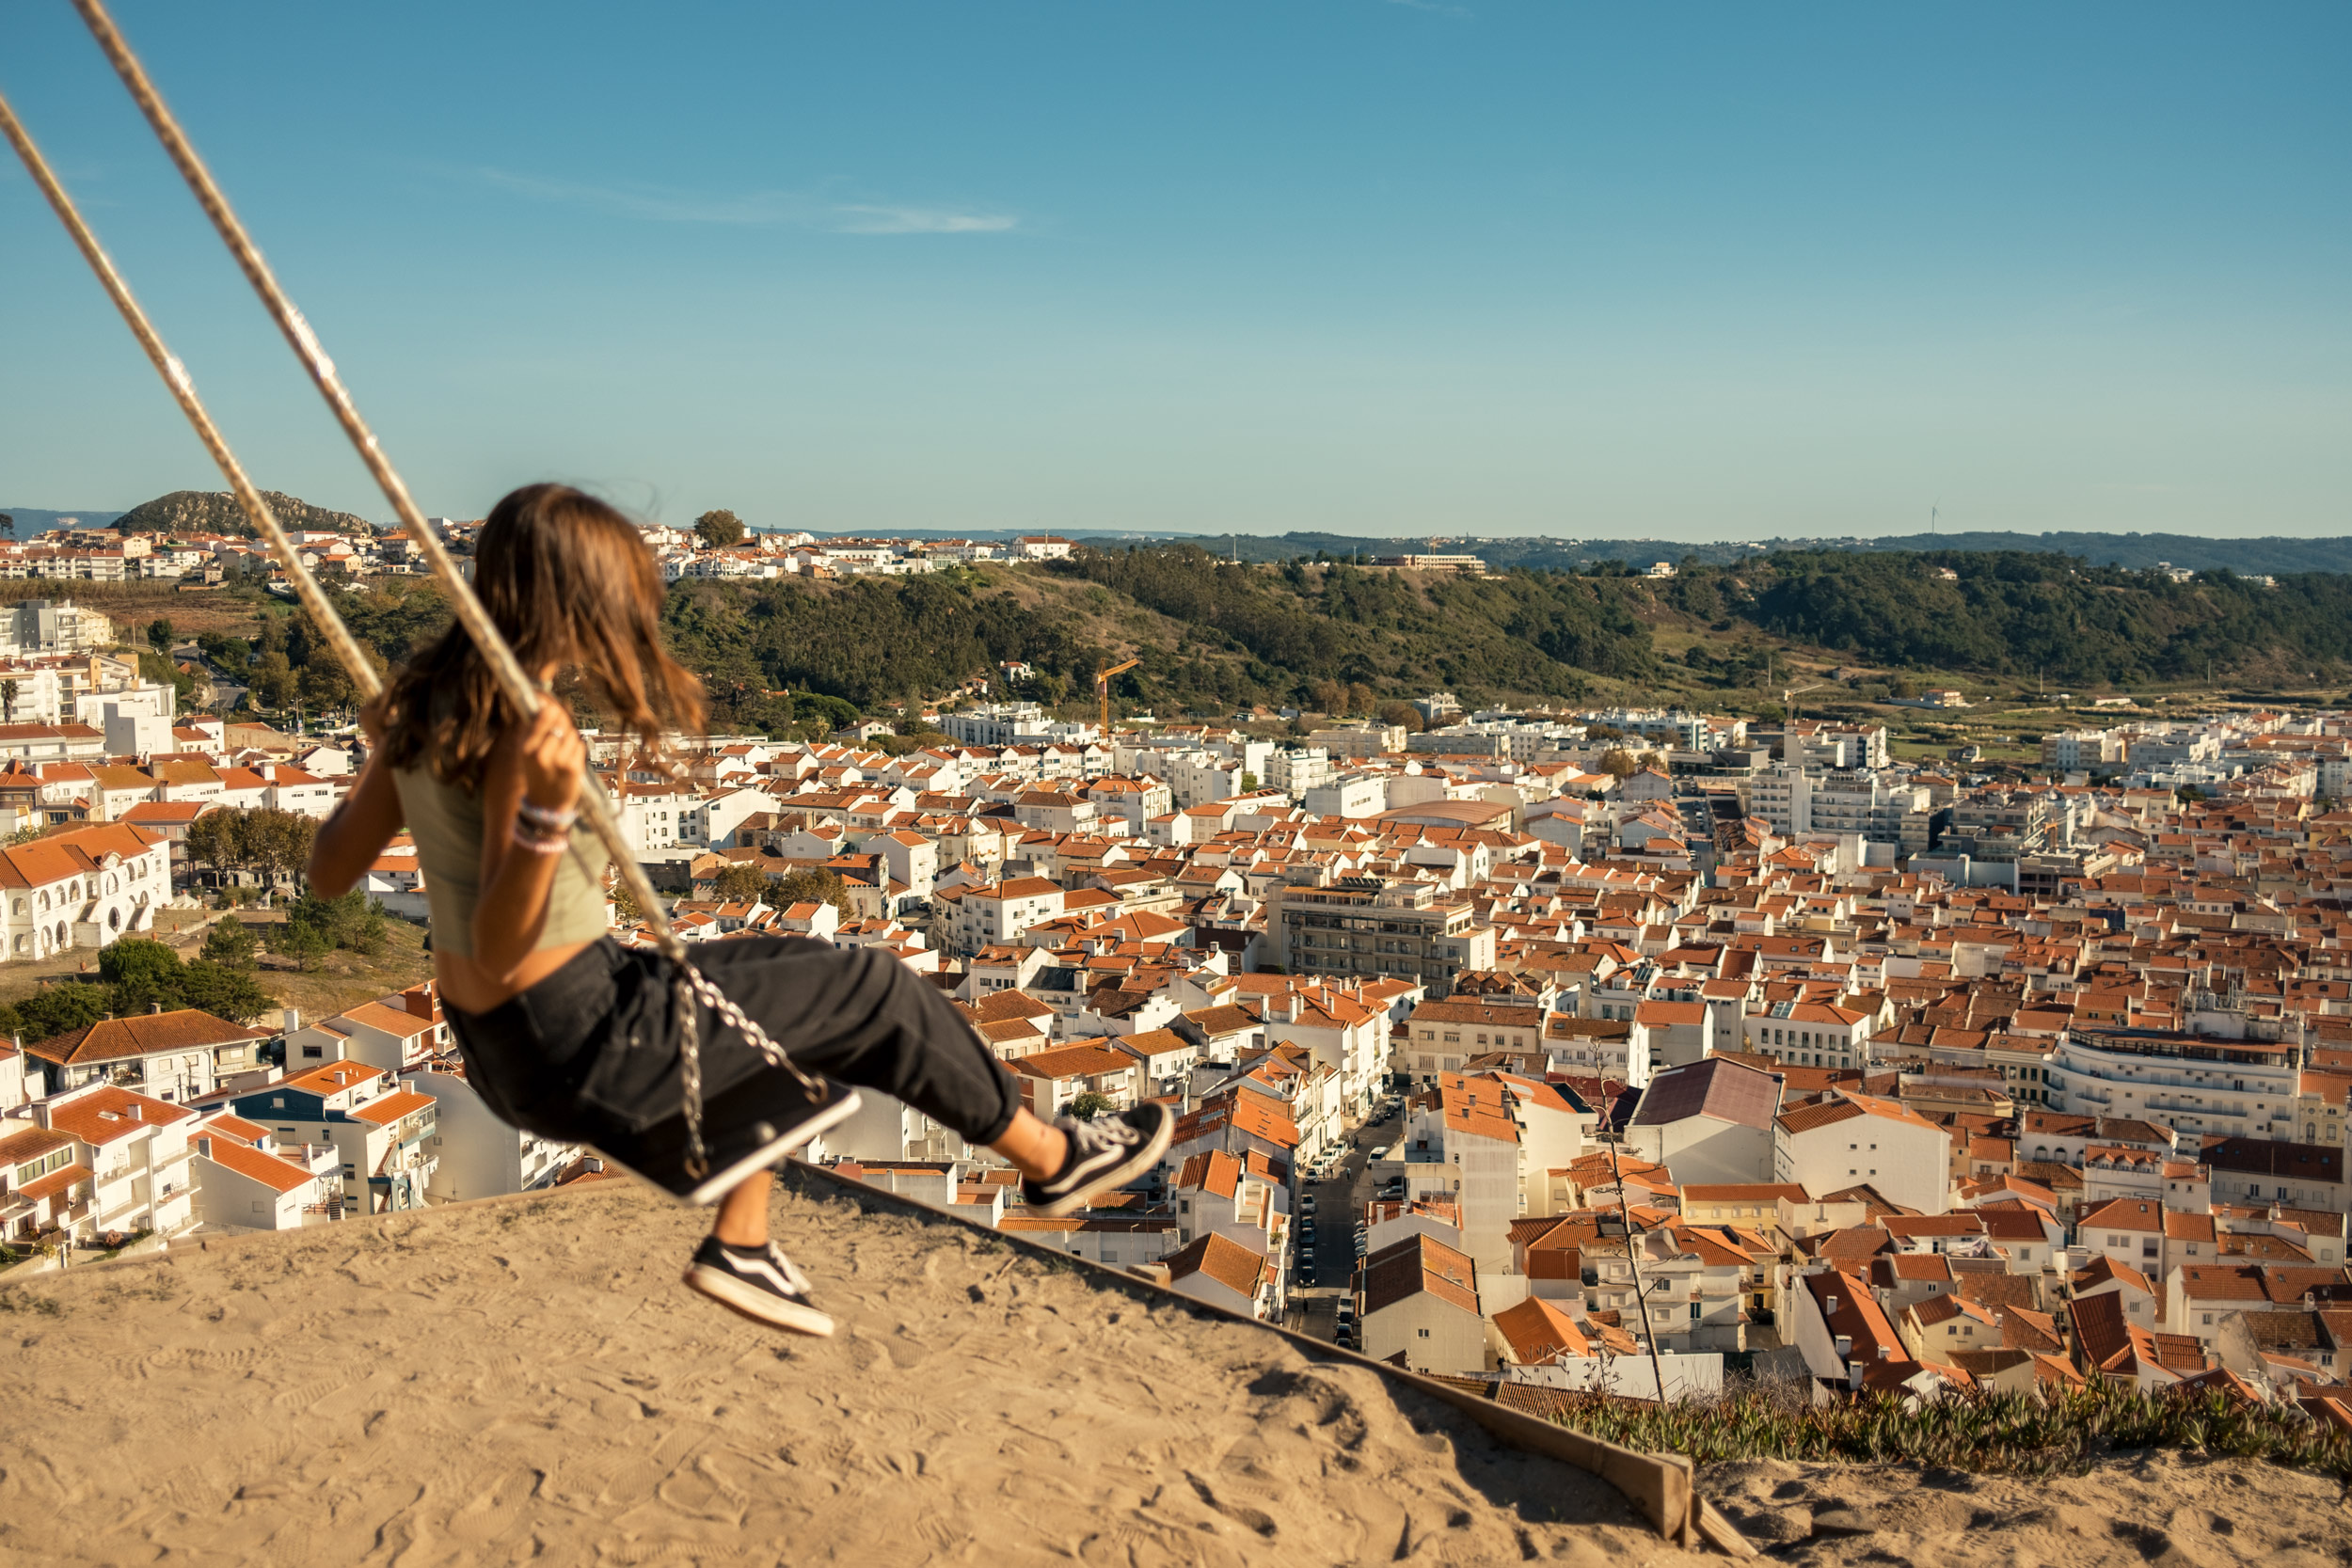 A-GIRL-SWINGS-OVER-THE-TOWN-OF-NAZARE